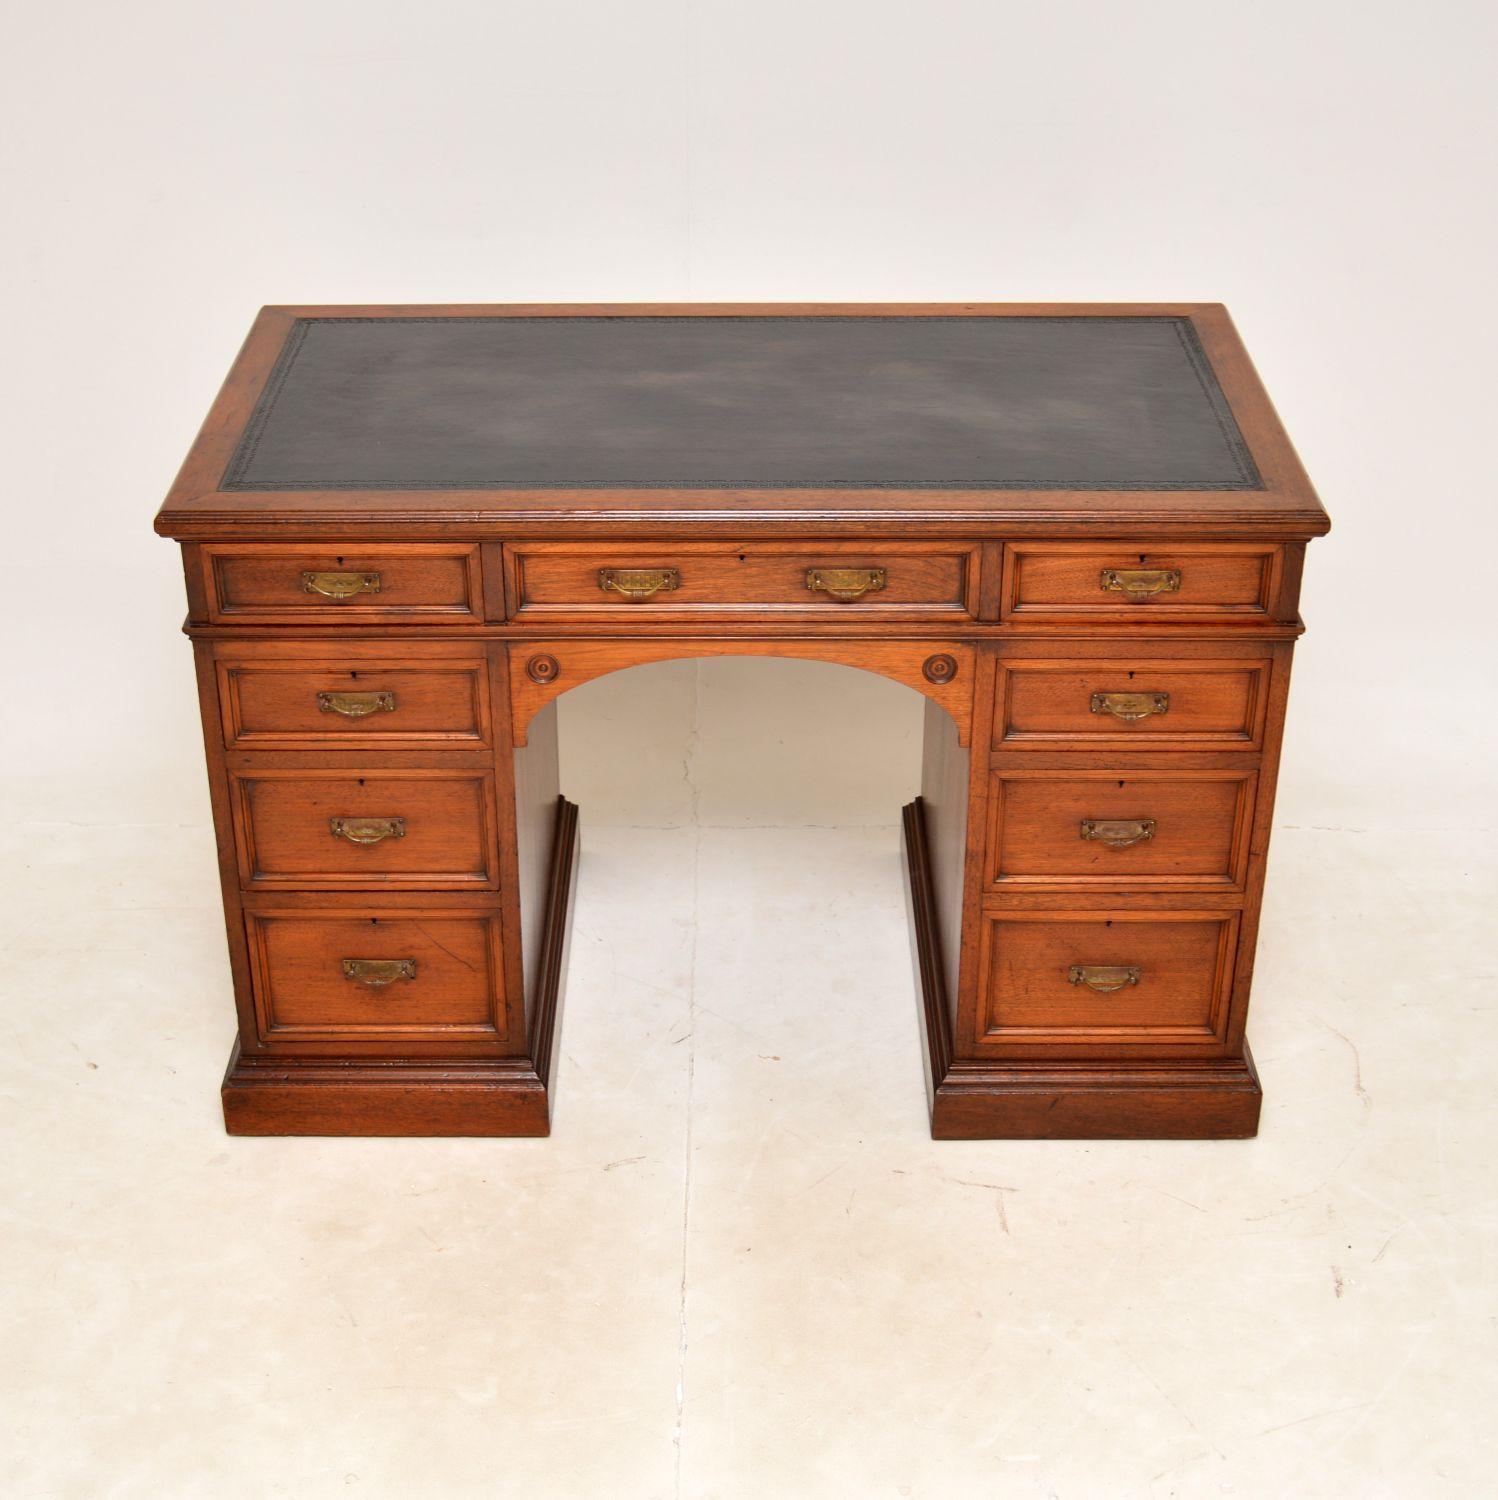 A top quality antique Victorian solid walnut desk by renowned cabinet makers Howard & Sons. This was made in England, it dates from around the 1870-1890 period.

It is extremely well made and is a useful, fairly petite size. There are lovely